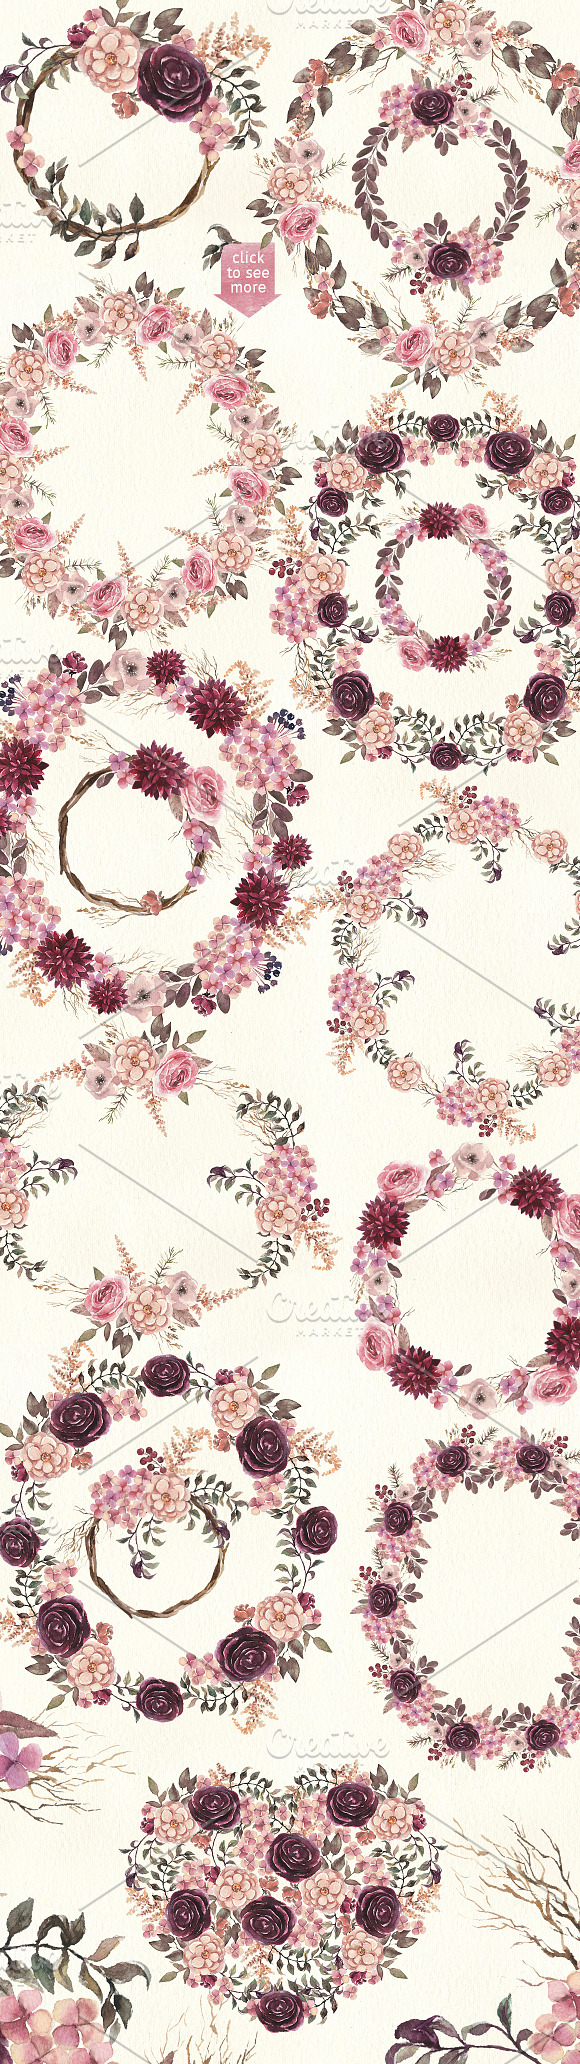 70%OFF Burgundy & Cream Floral Pack in Illustrations - product preview 3